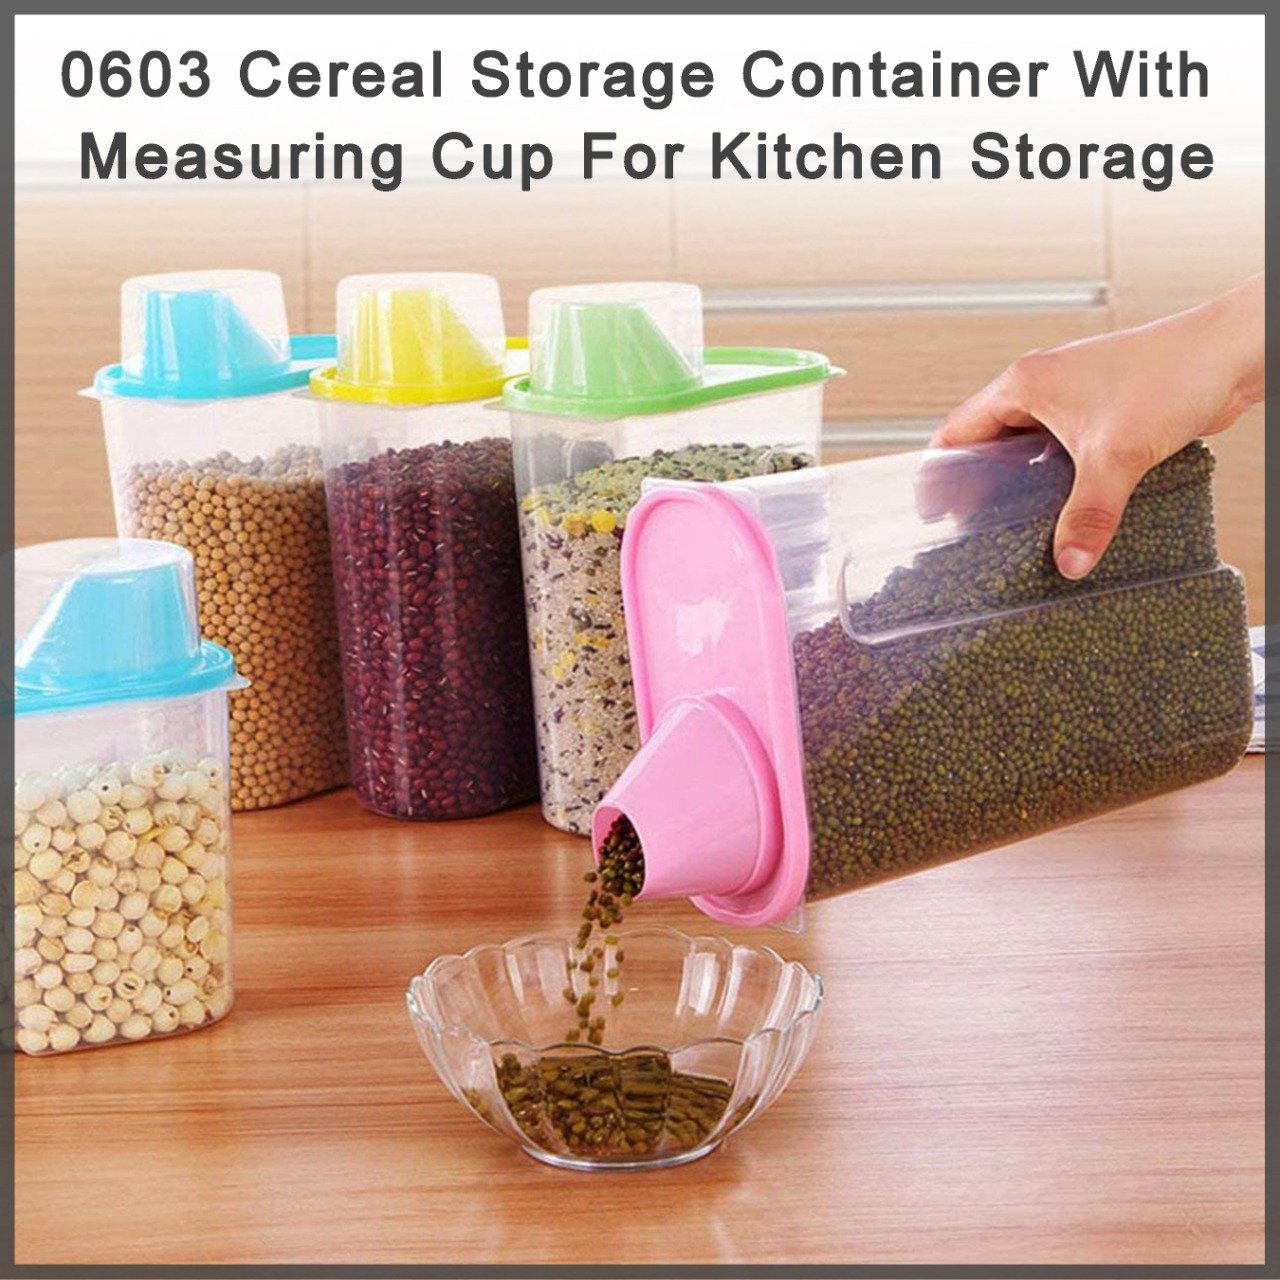 0603 Cereal Storage Container With Measuring Cup For Kitchen Storage (3 units) - SkyShopy